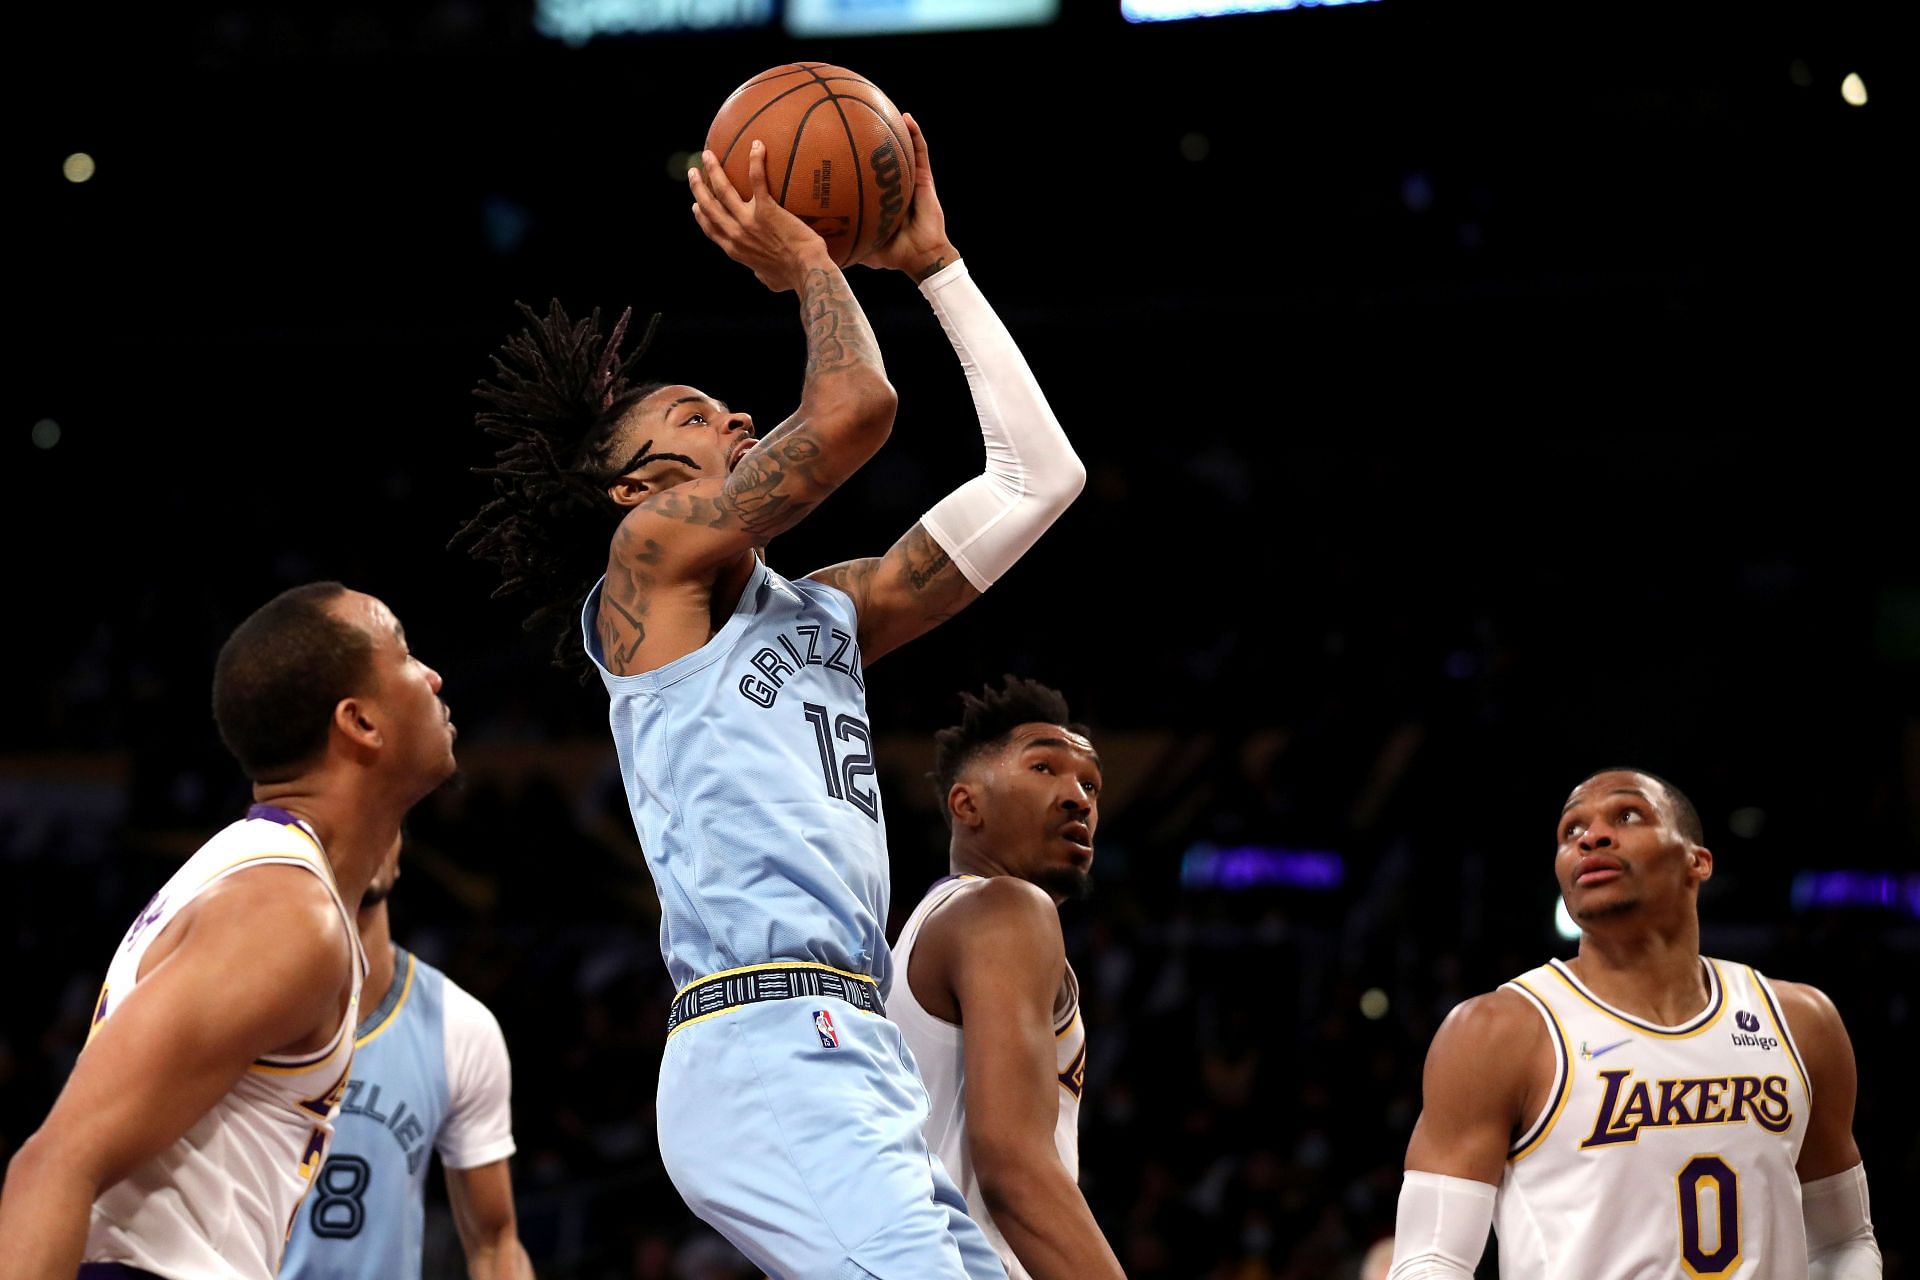 Ja Morant #12 of the Memphis Grizzlies shoots the ball against Avery Bradley #20, Malik Monk #11 and Russell Westbrook #0 of the Los Angeles Lakers during the third quarter at Crypto.com Arena on January 09, 2022 in Los Angeles, California.